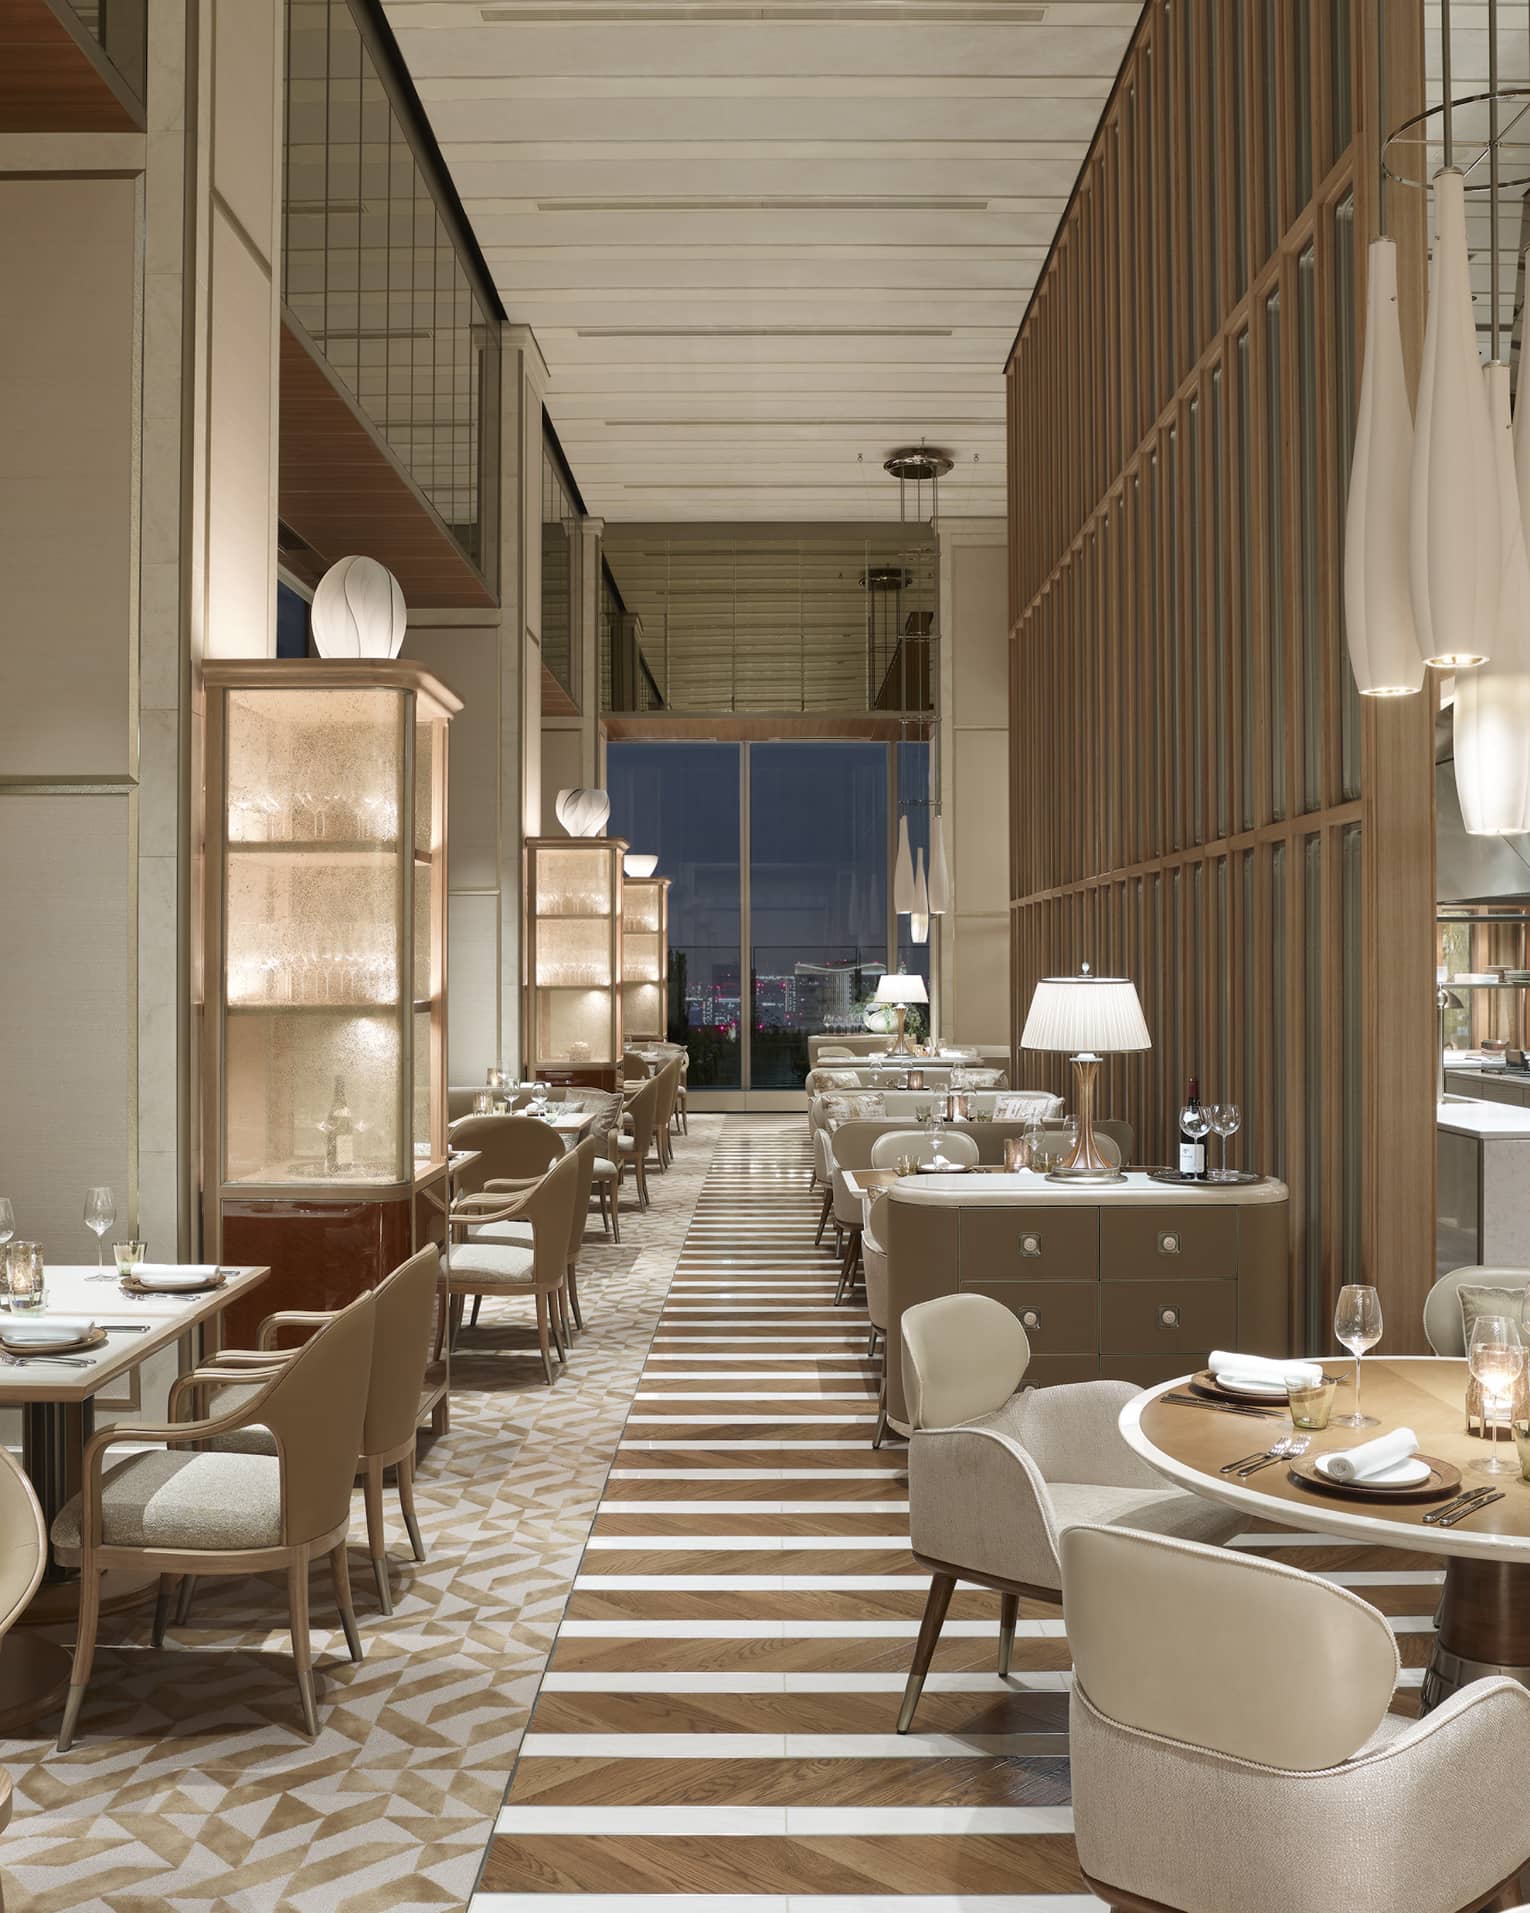 Restaurant with off-white chairs and sofas, elegant chandeliers, windows with nighttime views